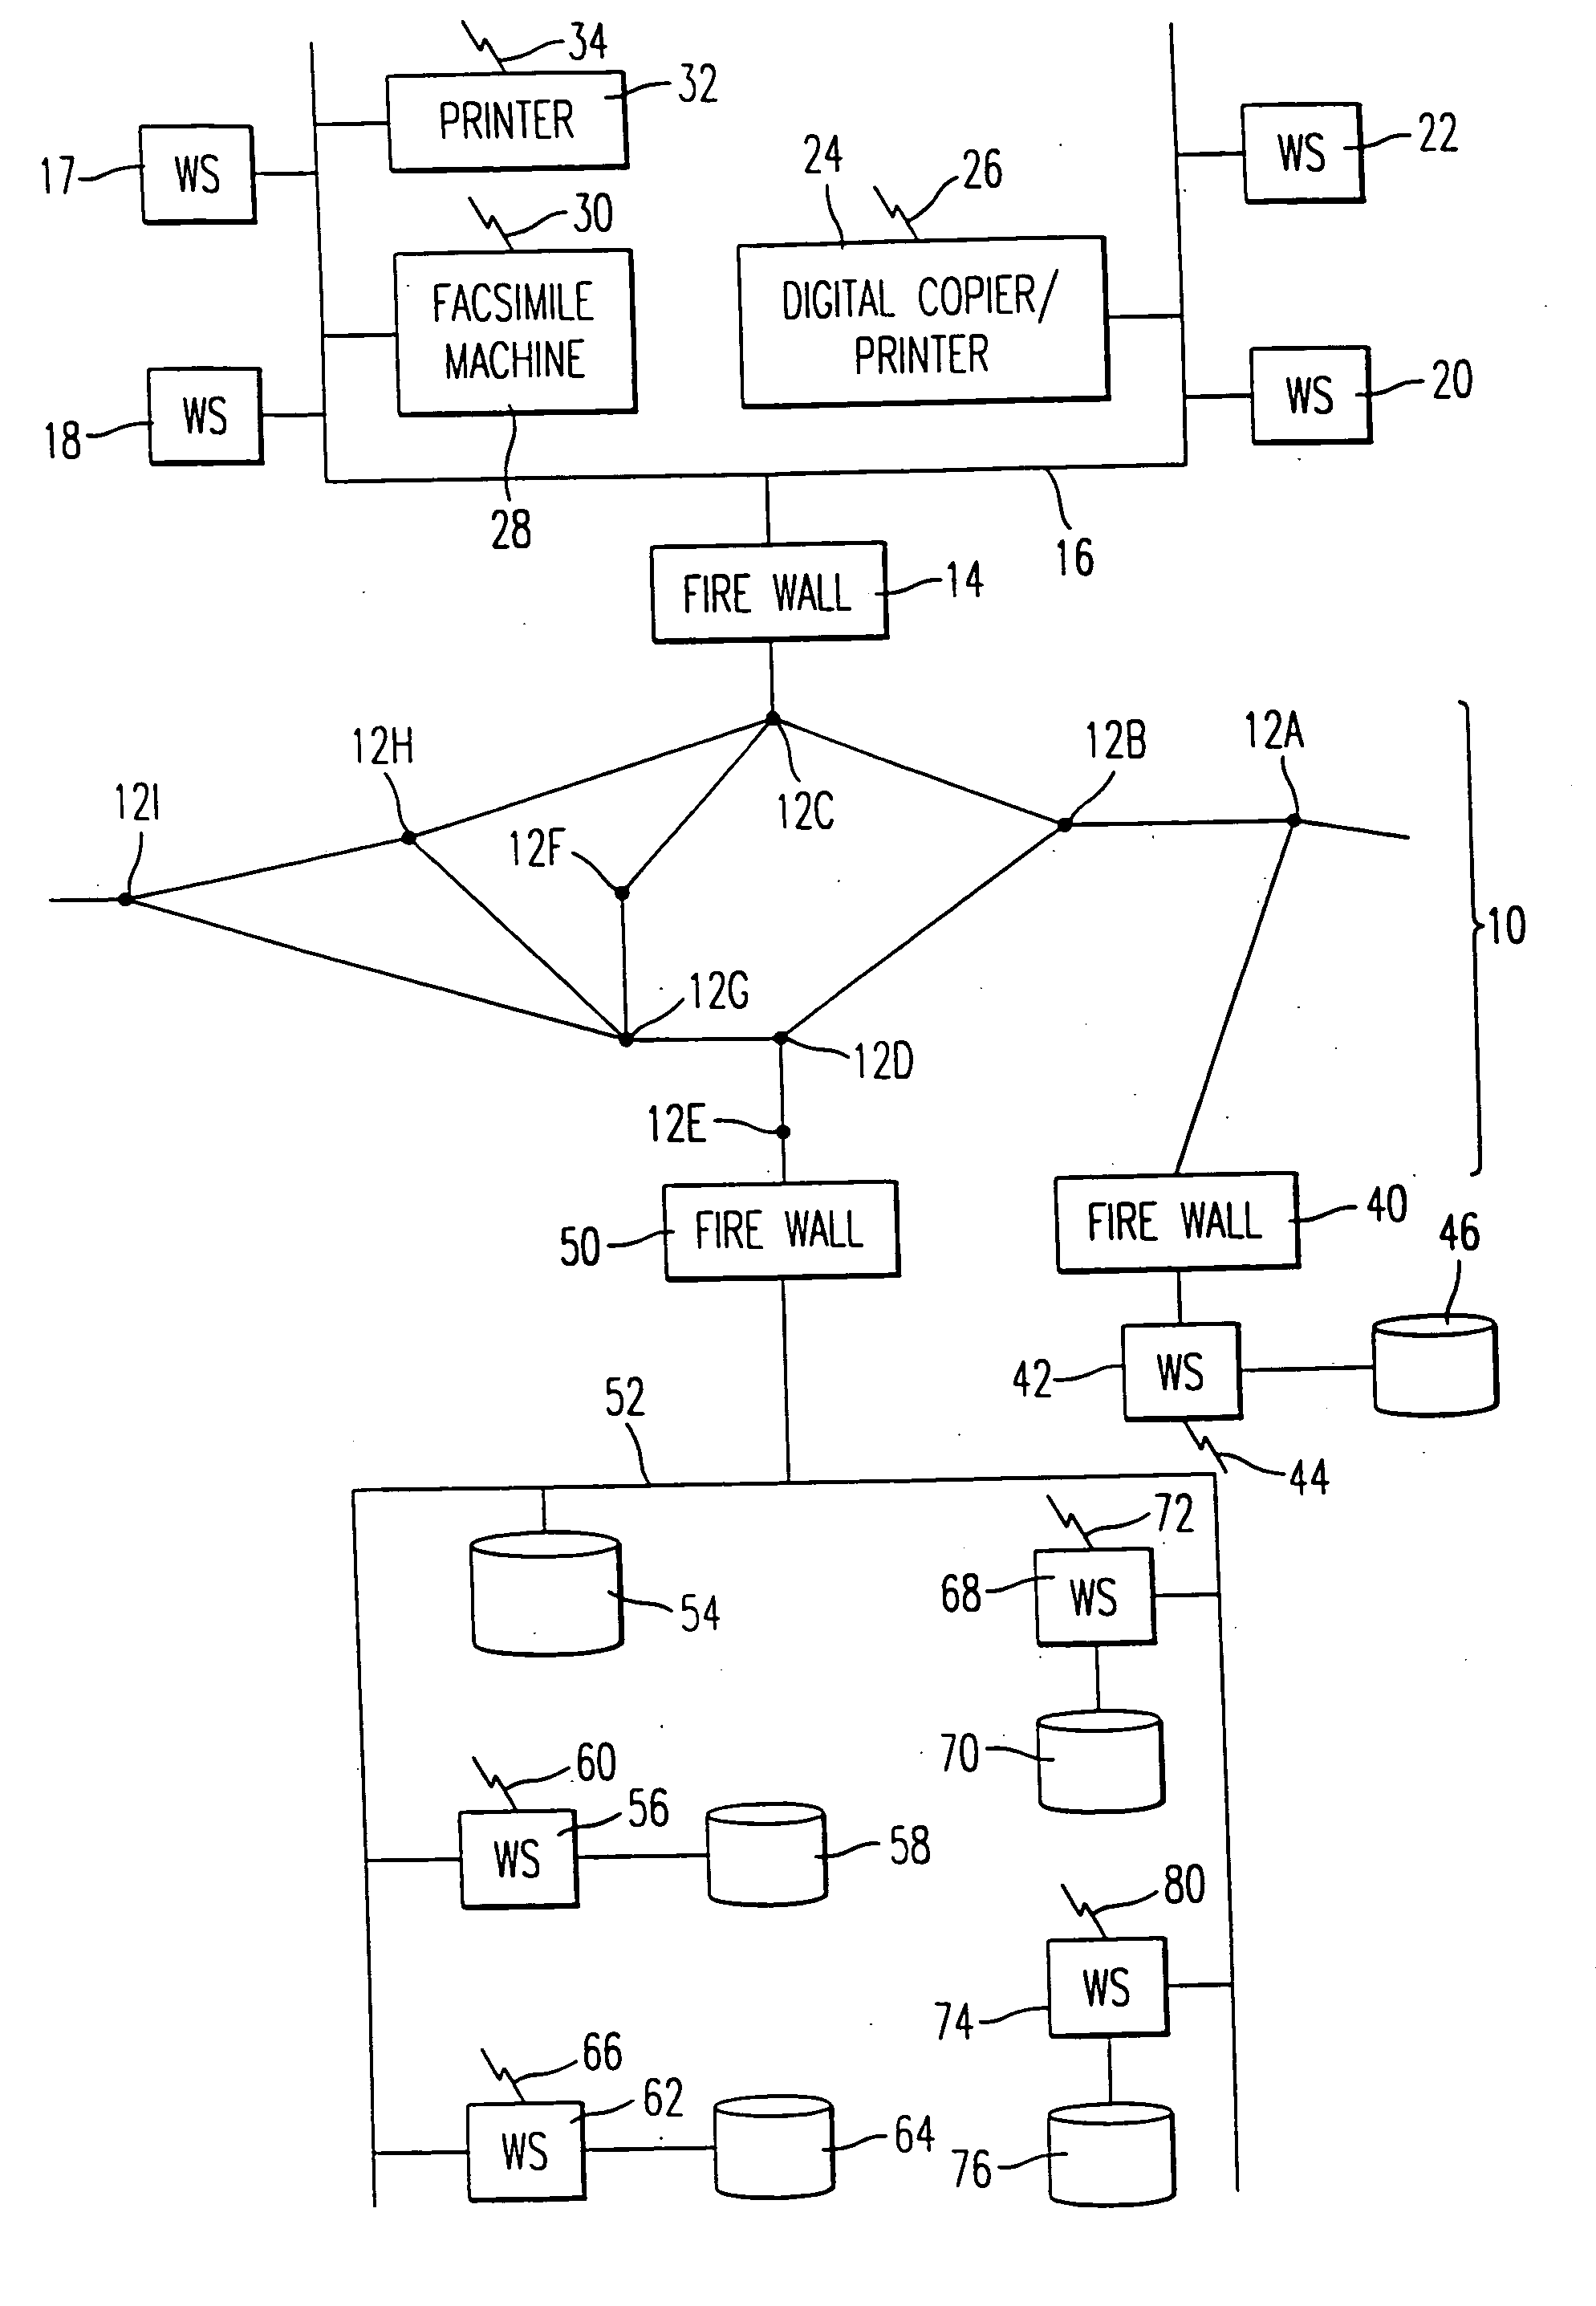 Method and system for diagnosis and control of machines using connection and connectionless modes of communication